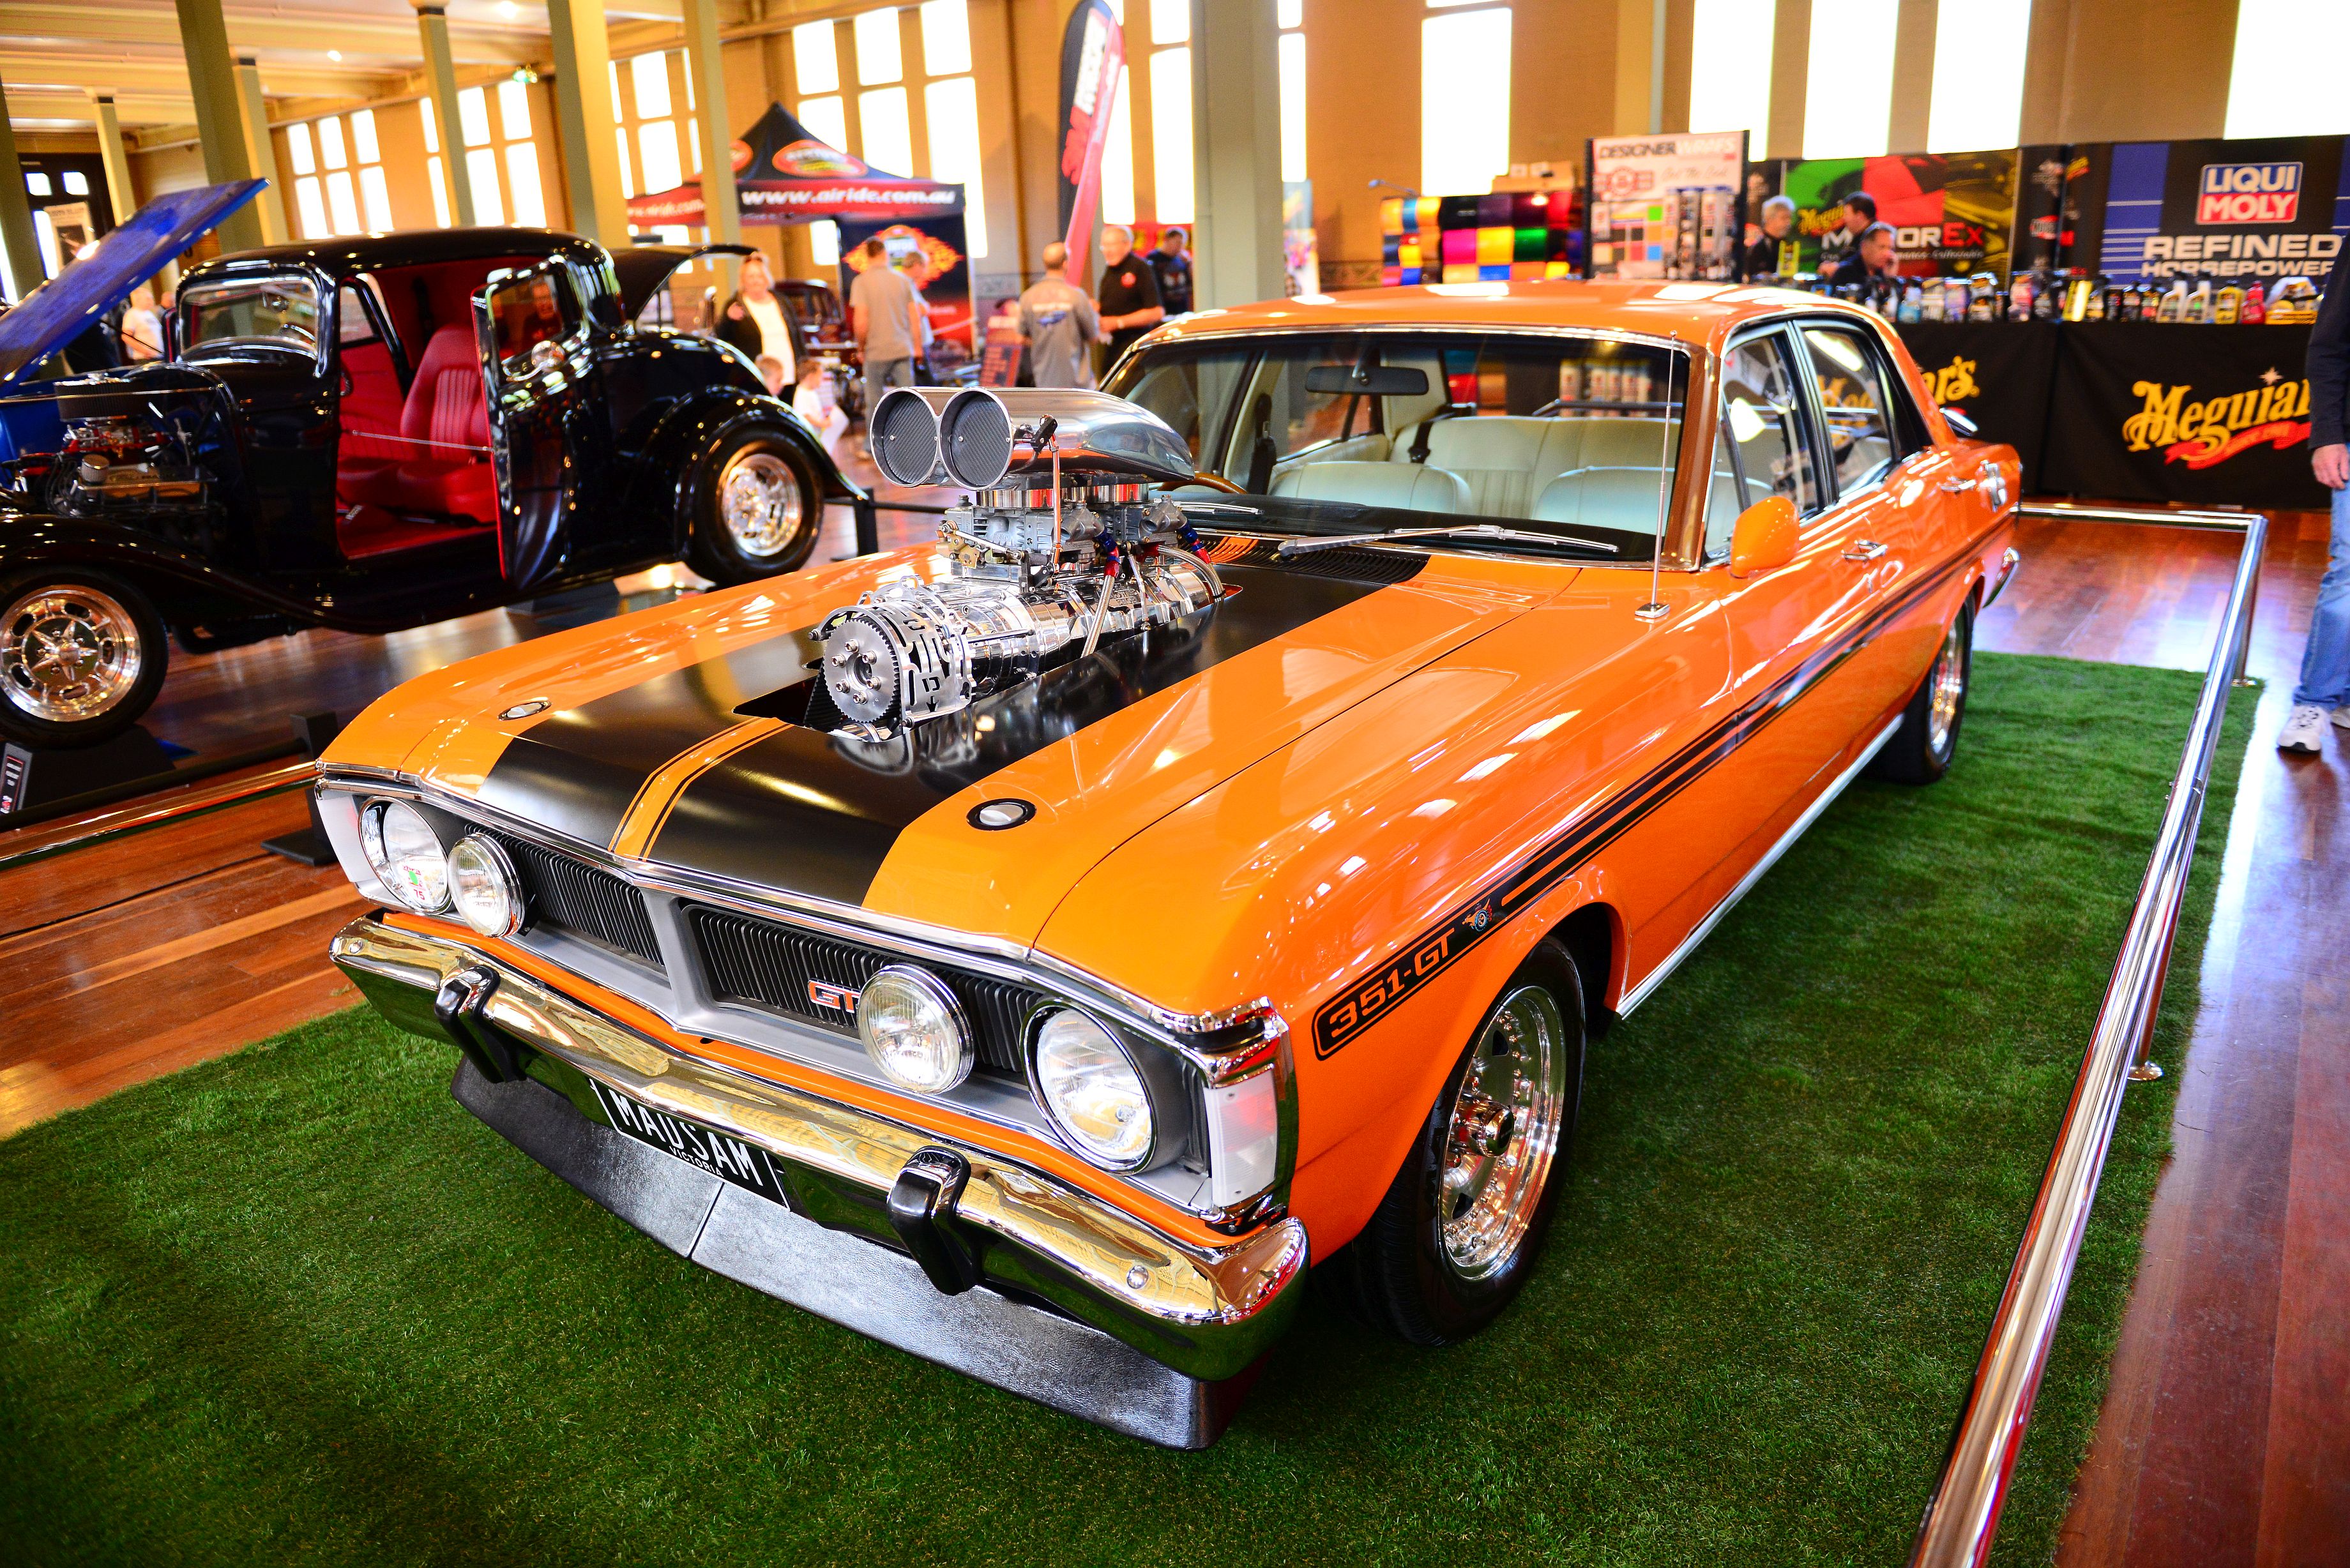 Hot Rod Show Pics, Video Game Collection